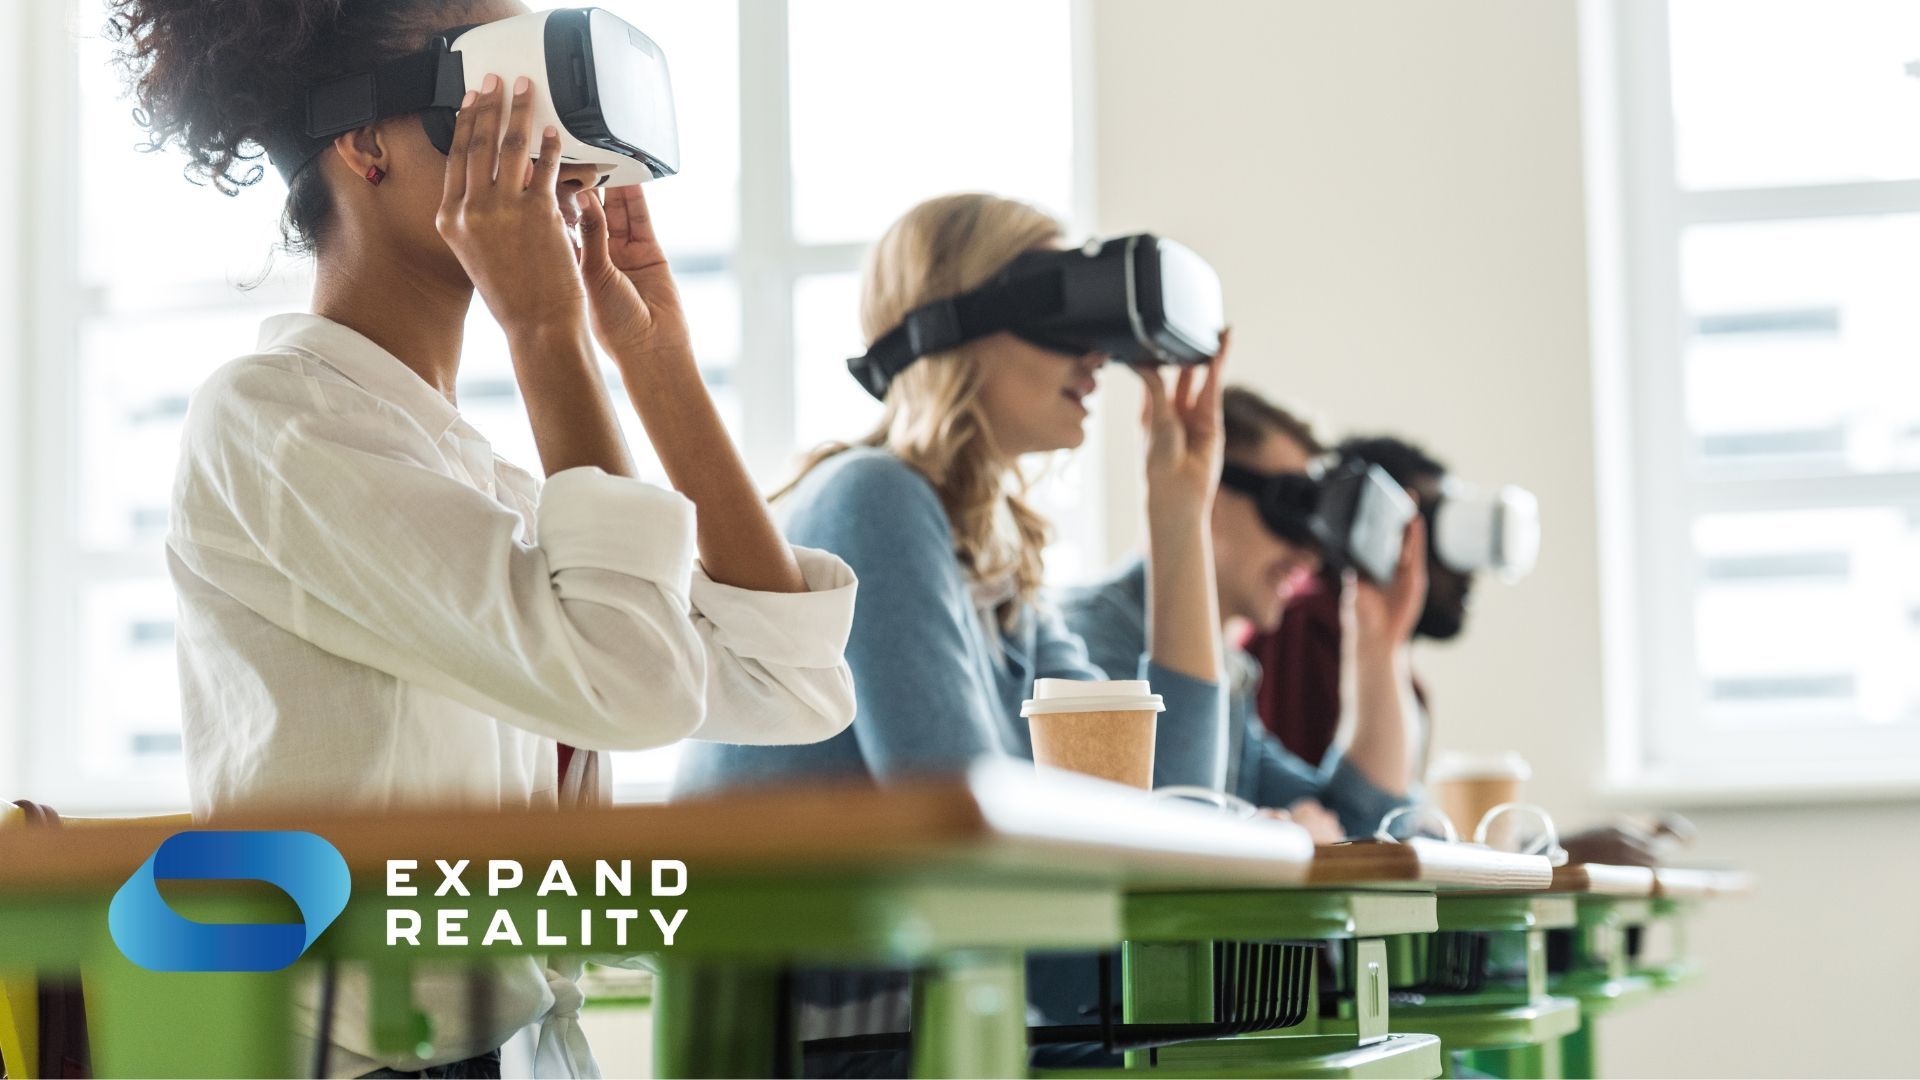 Have you heard of Meta's immersive learning pilot? Get the lowdown on what it's all about and explore the growing adoption of XR in academia.
